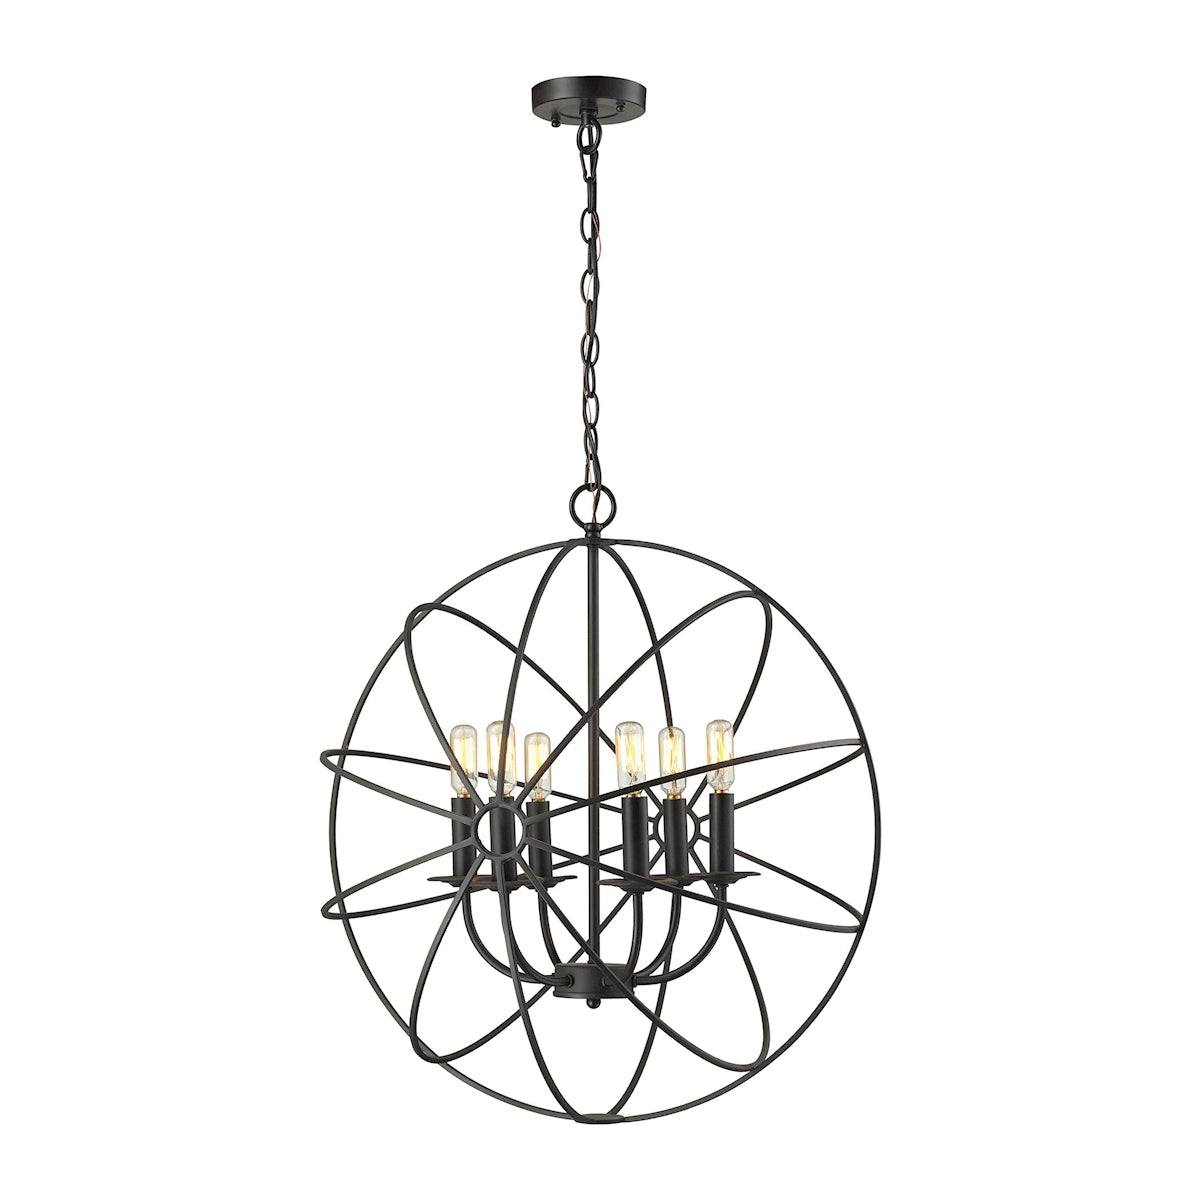 ELK Lighting 14244/6 Yardley 6-Light Chandelier in Oil Rubbed Bronze with Wire Cage